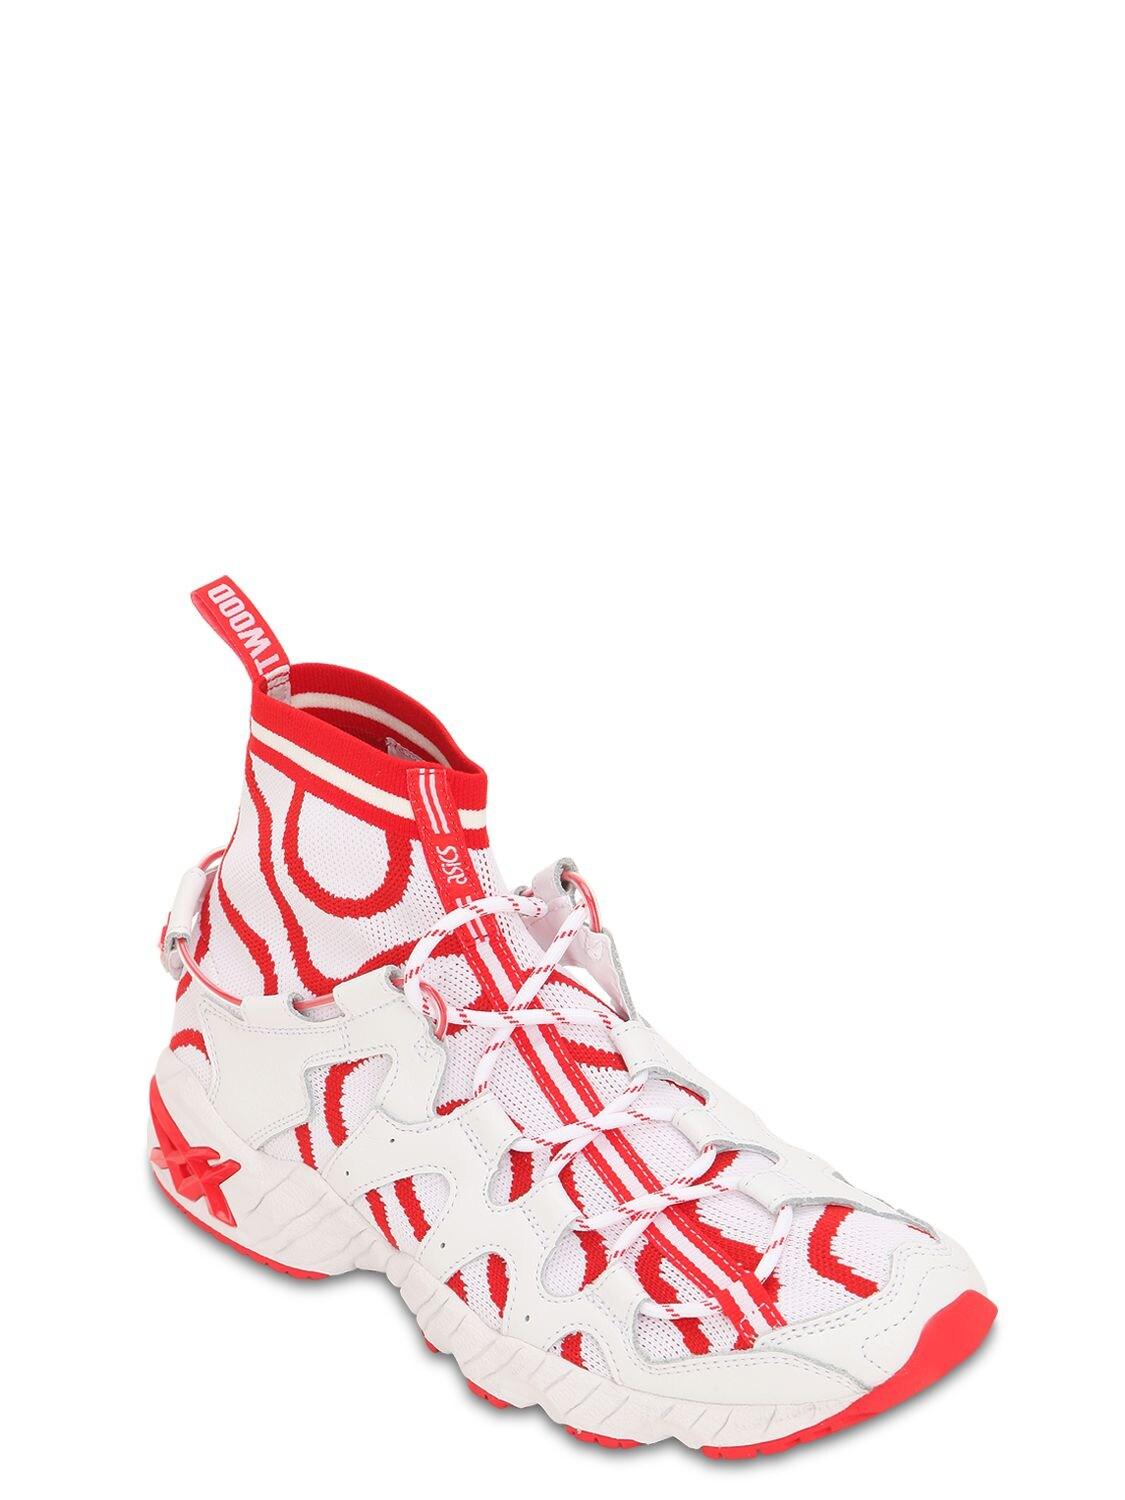 Asics Vivienne Westwood Gel-mai Knit Sneakers in White/Red (Red) for Men |  Lyst